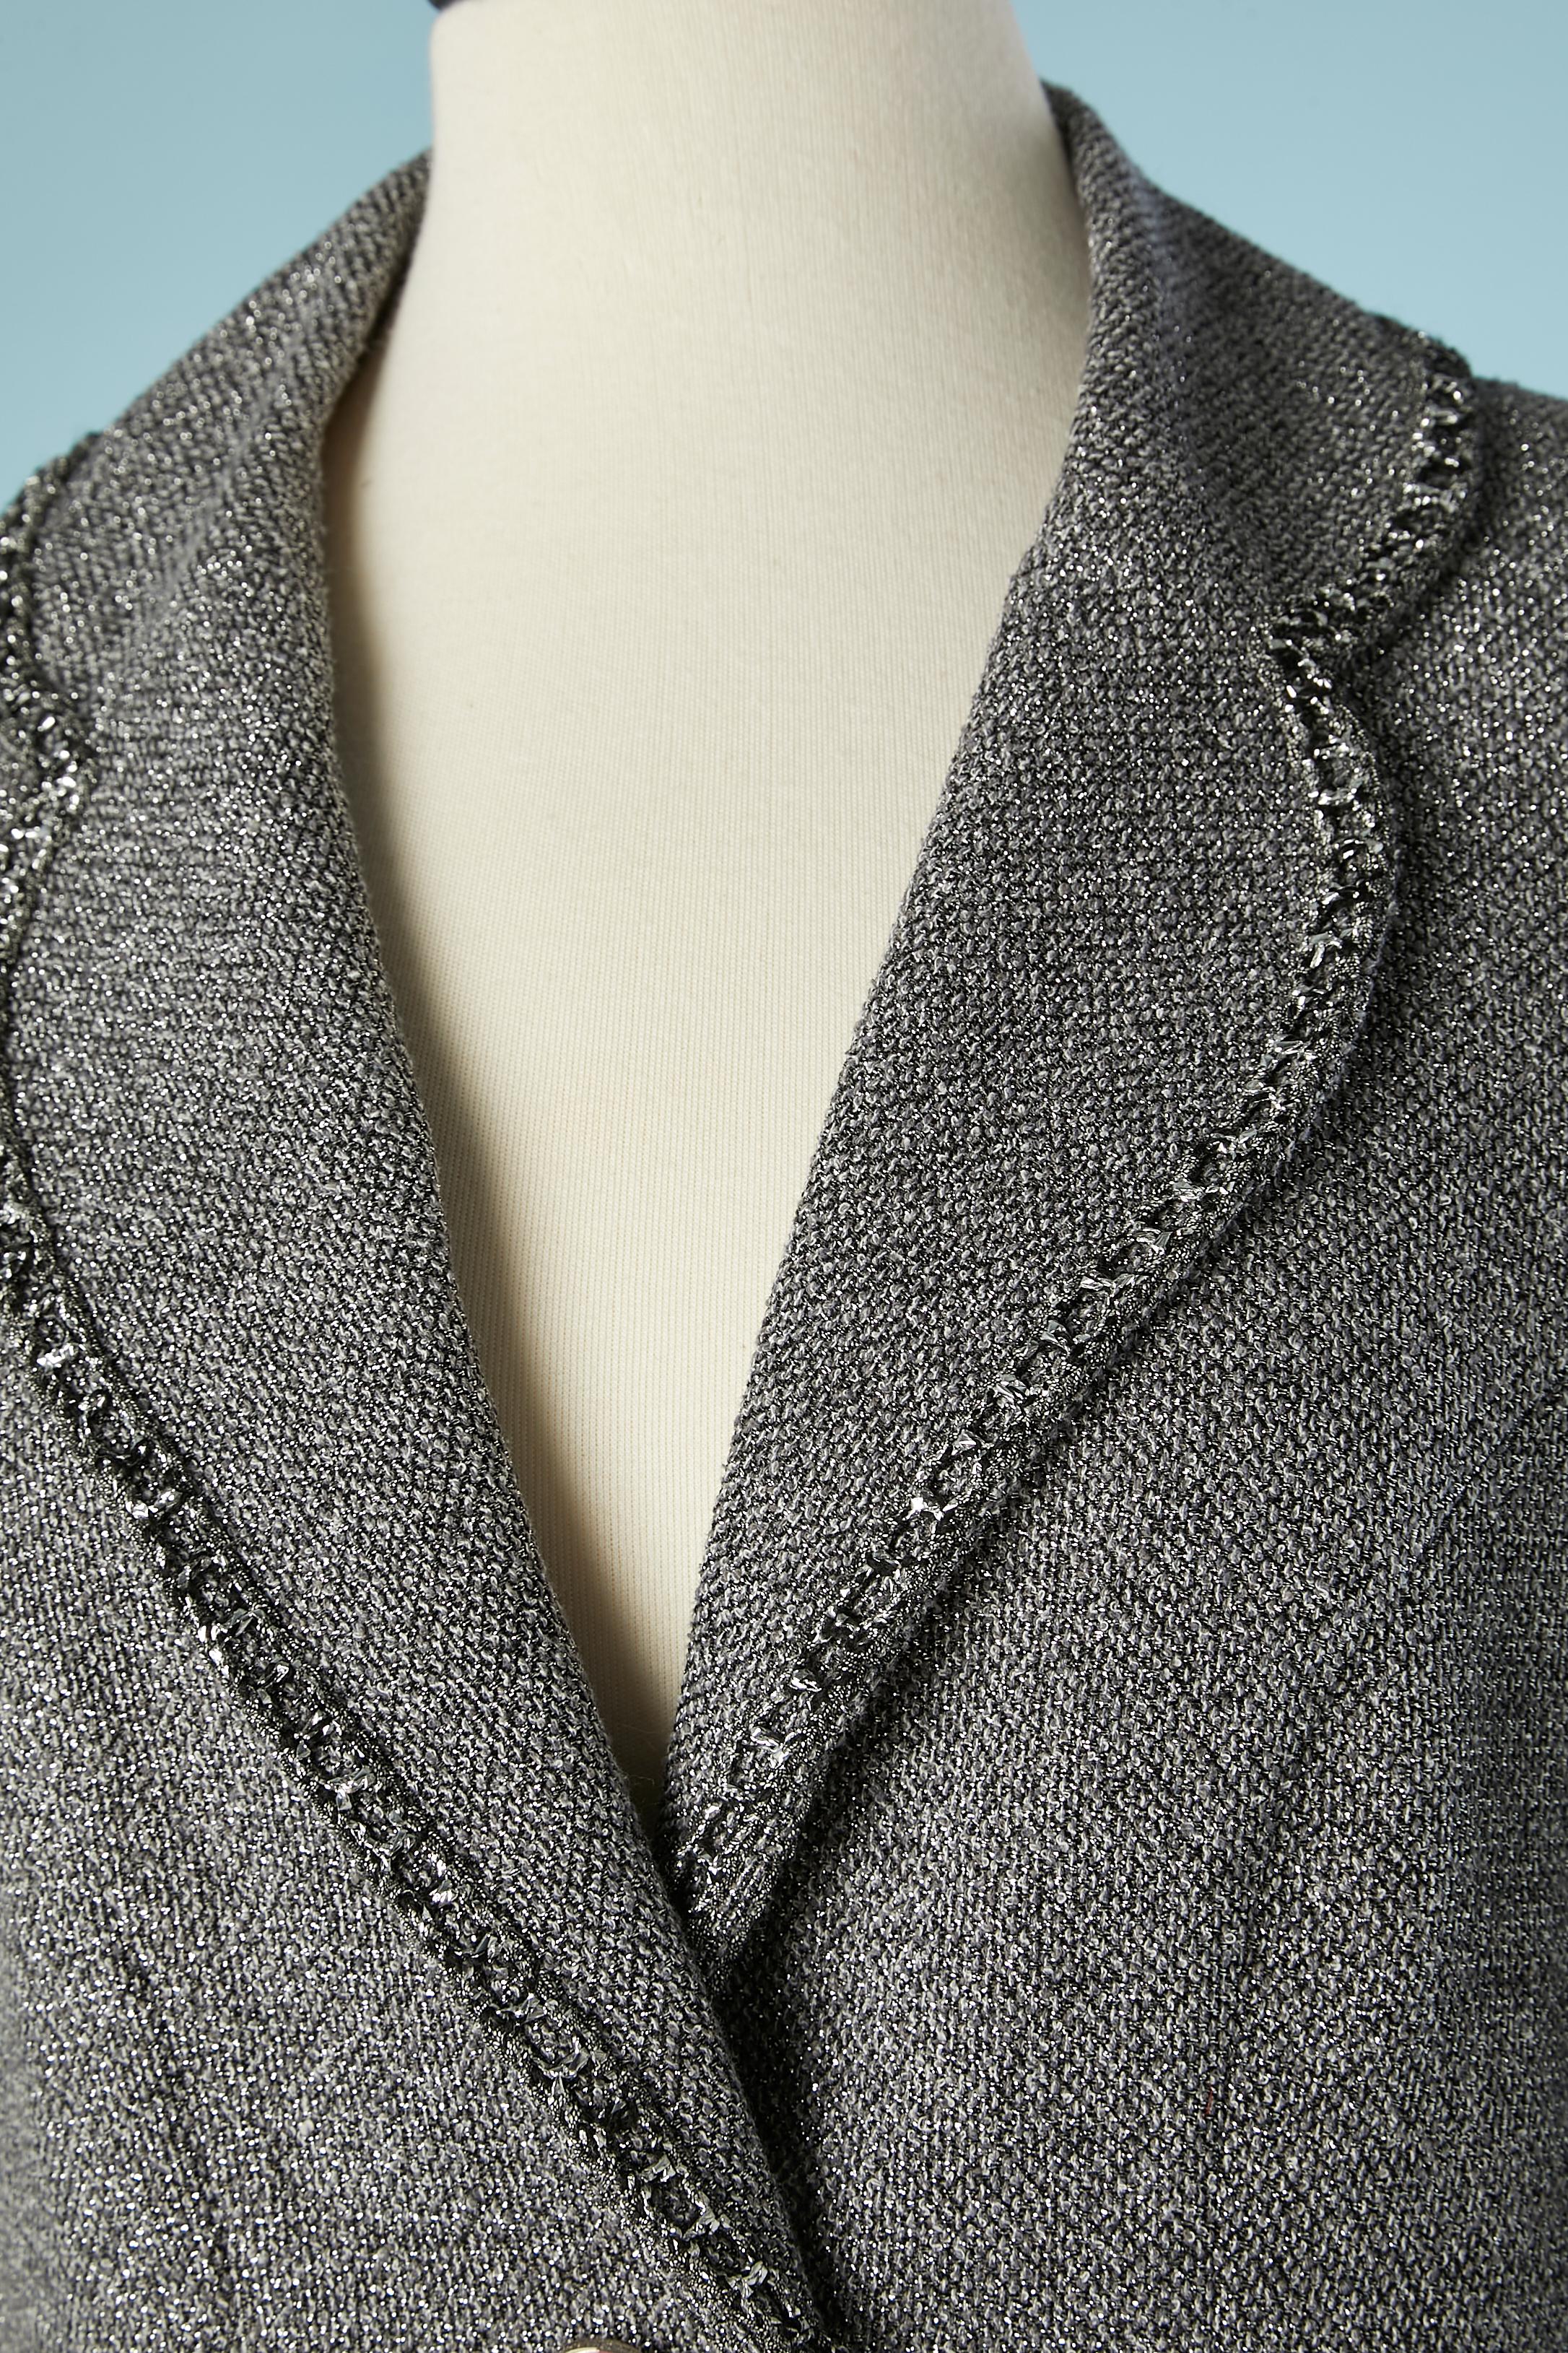 Grey and black tweed lurex double-breasted jacket.Raglan. Branded buttons in the middle front and cuffs. Fabric composition: 49% cotton, 31% rayon, 12% polyester, 8% polyamide. Silk branded lining. 
SIZE 42 (Fr) 12 (Us)